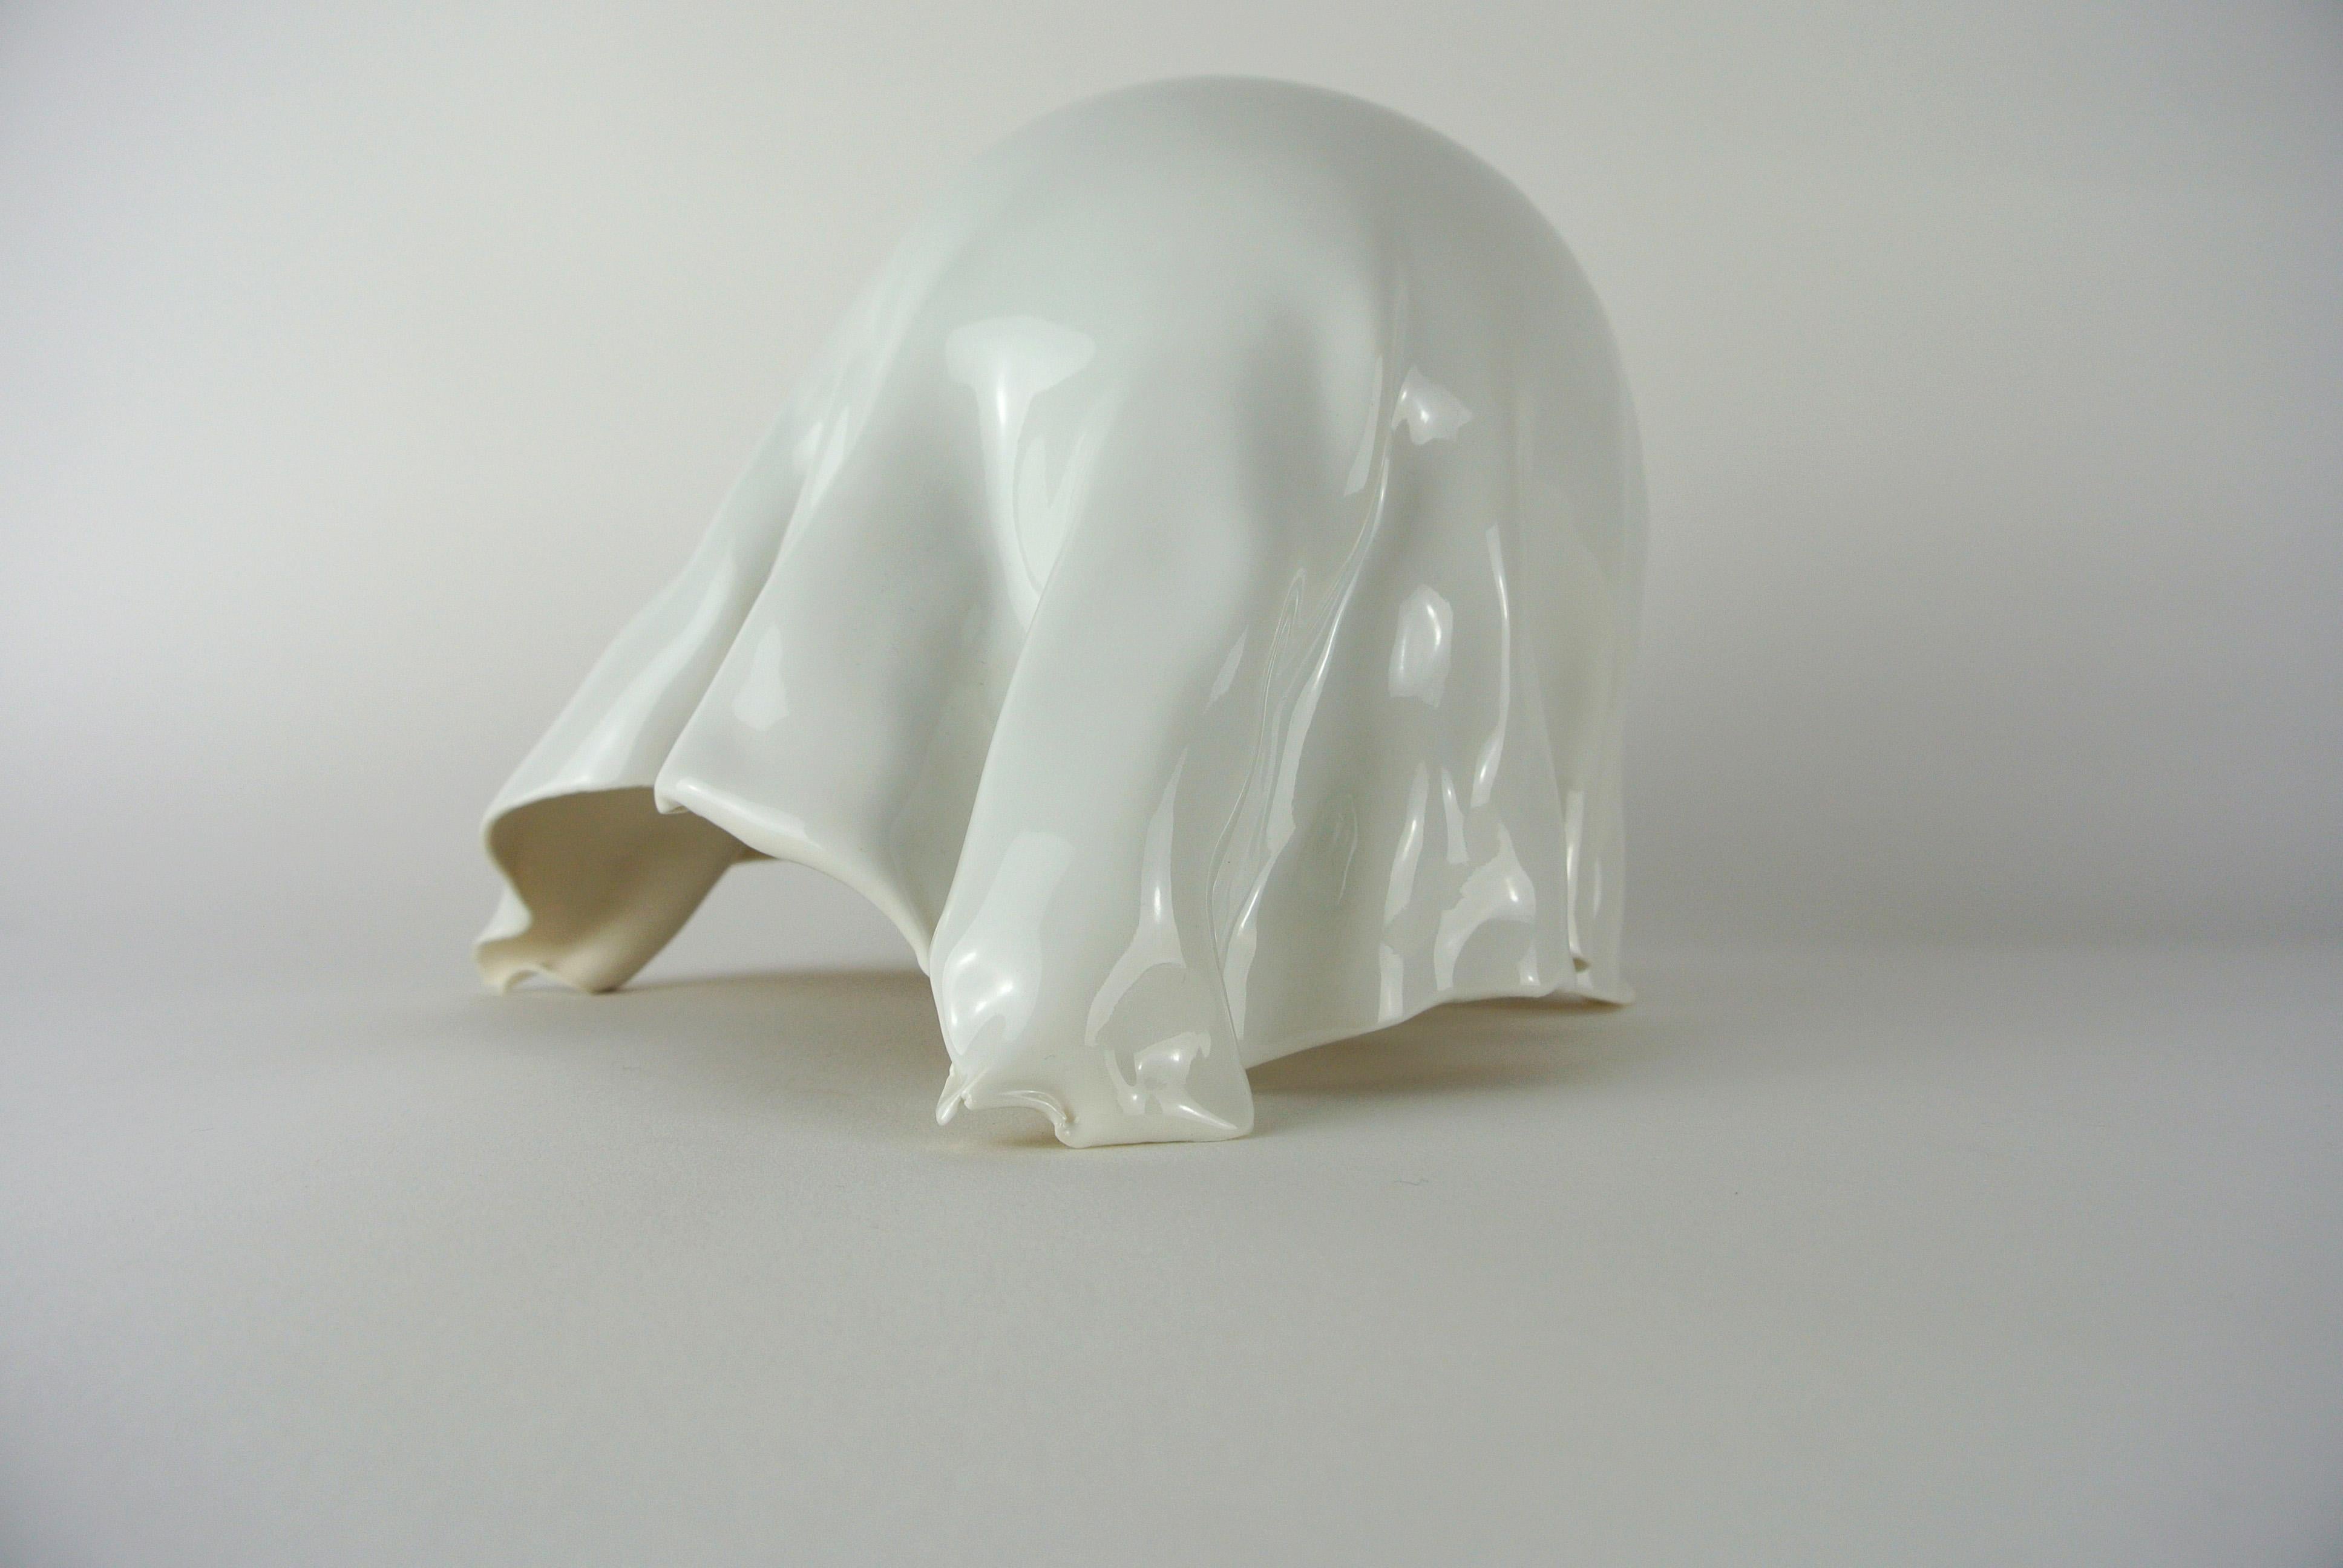 German Contemporary White Porcelain Object by Danish Artist Christine Roland For Sale